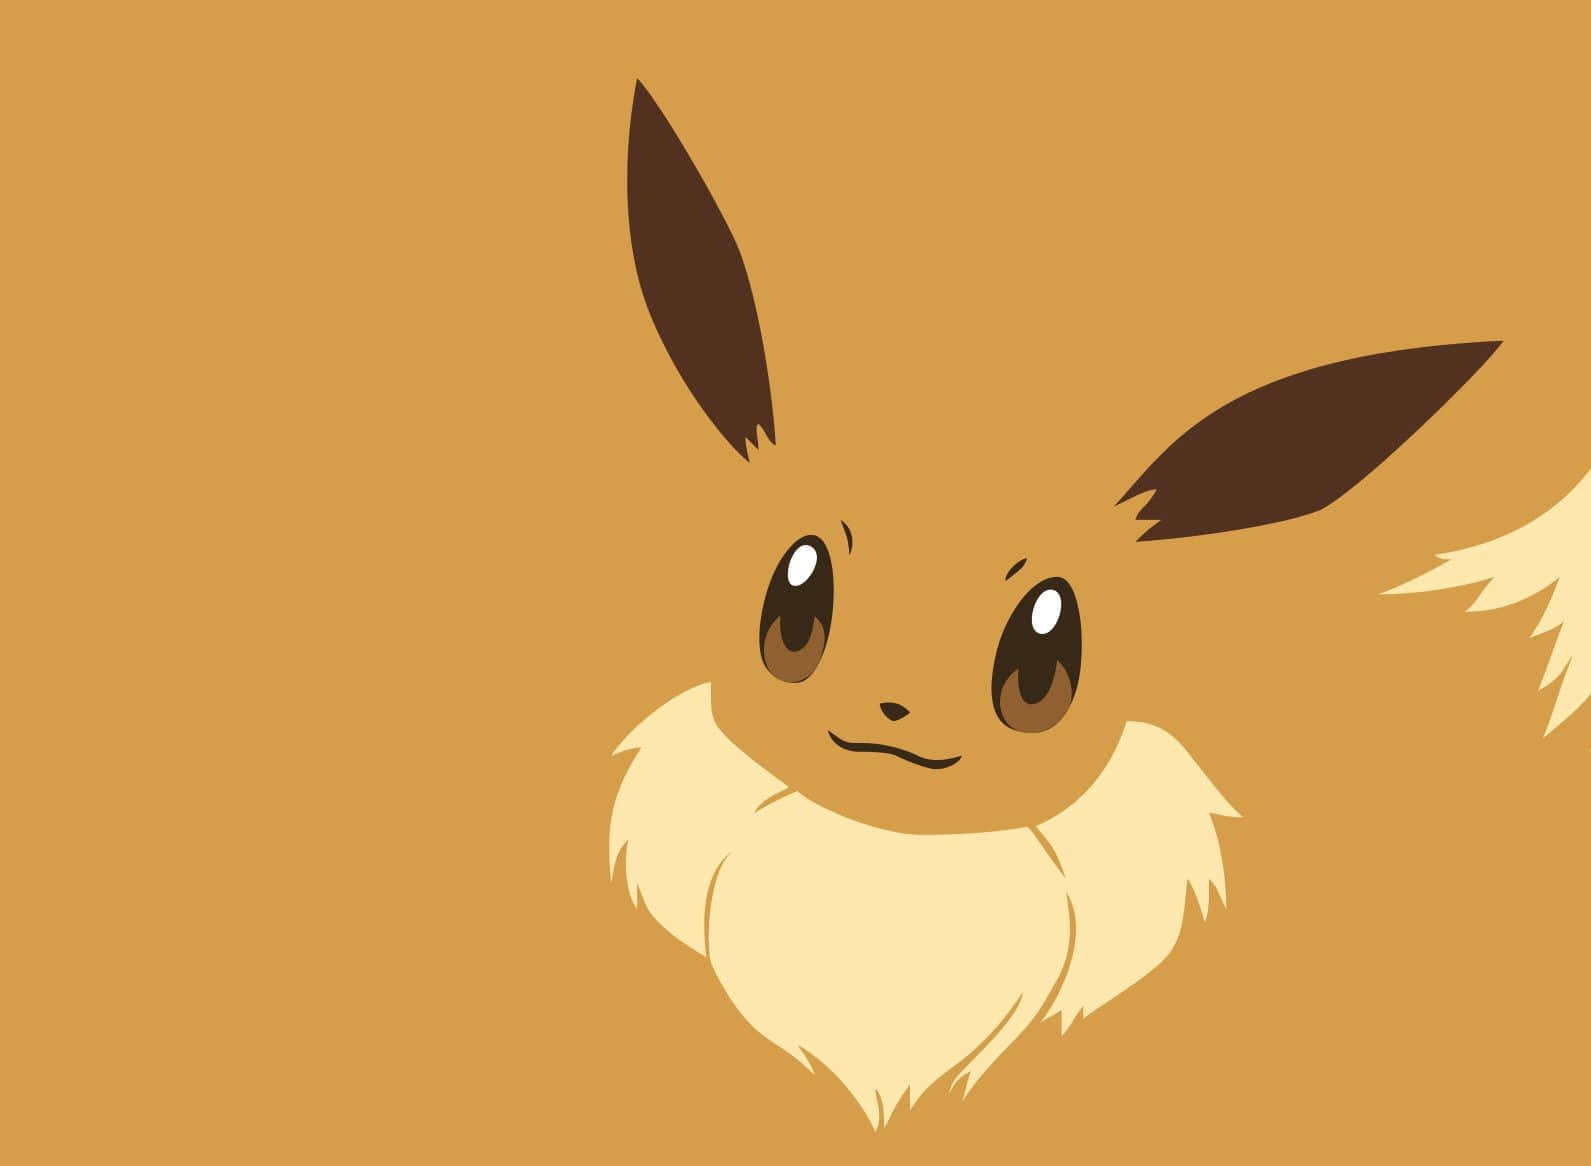 Cuddle up with Eevee Wallpaper